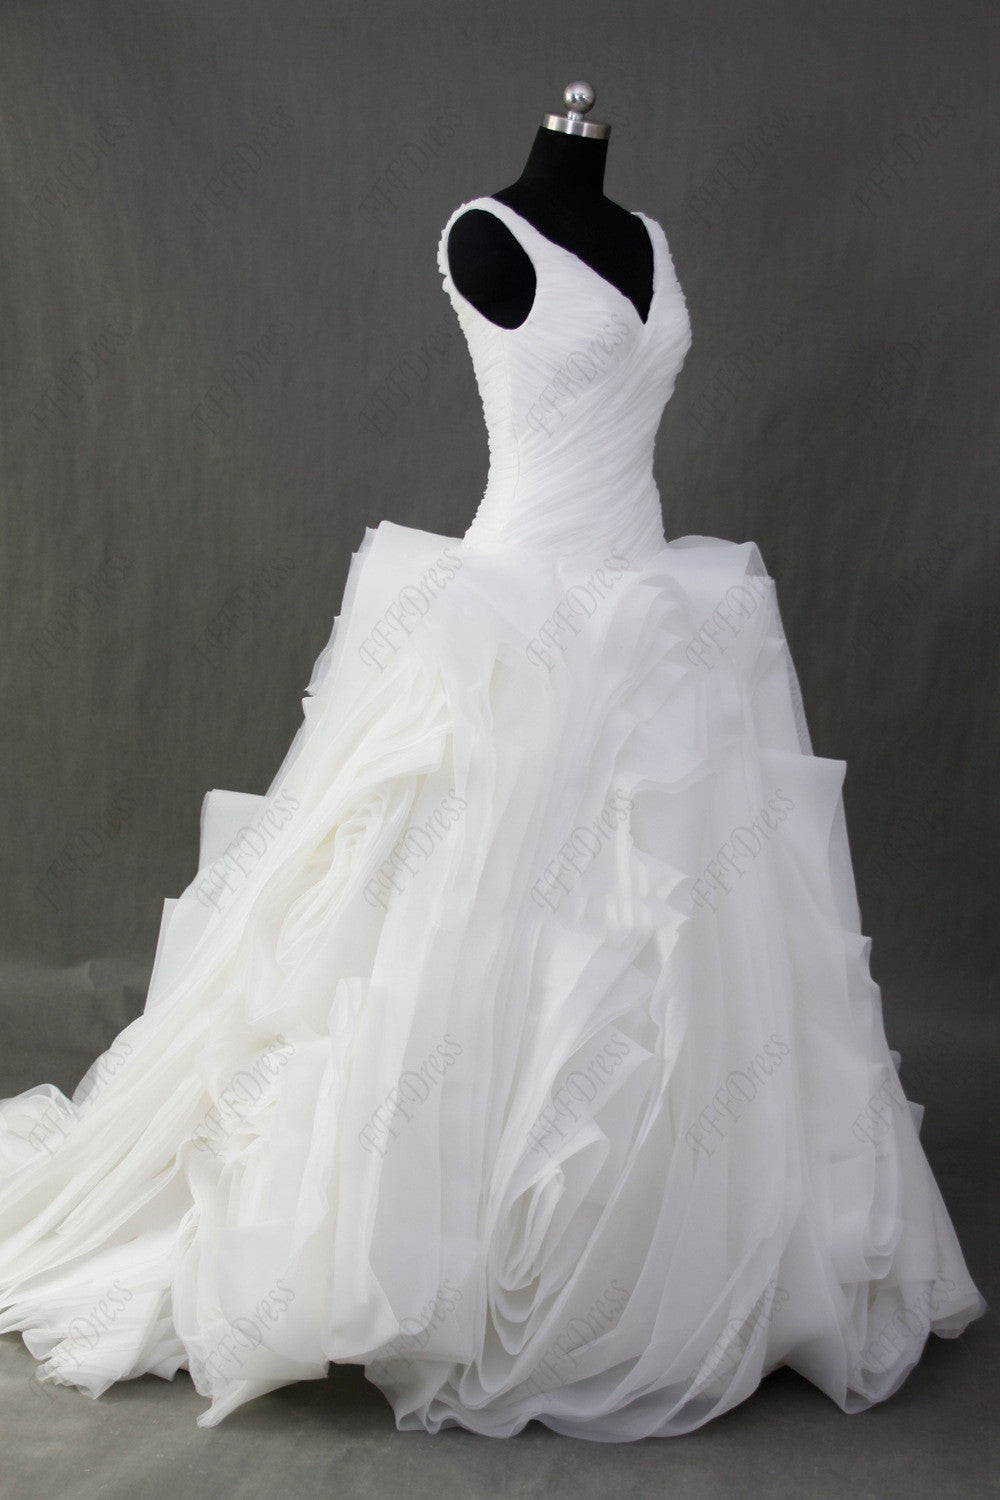 Ball gown swirled V Neck wedding dresses with sash